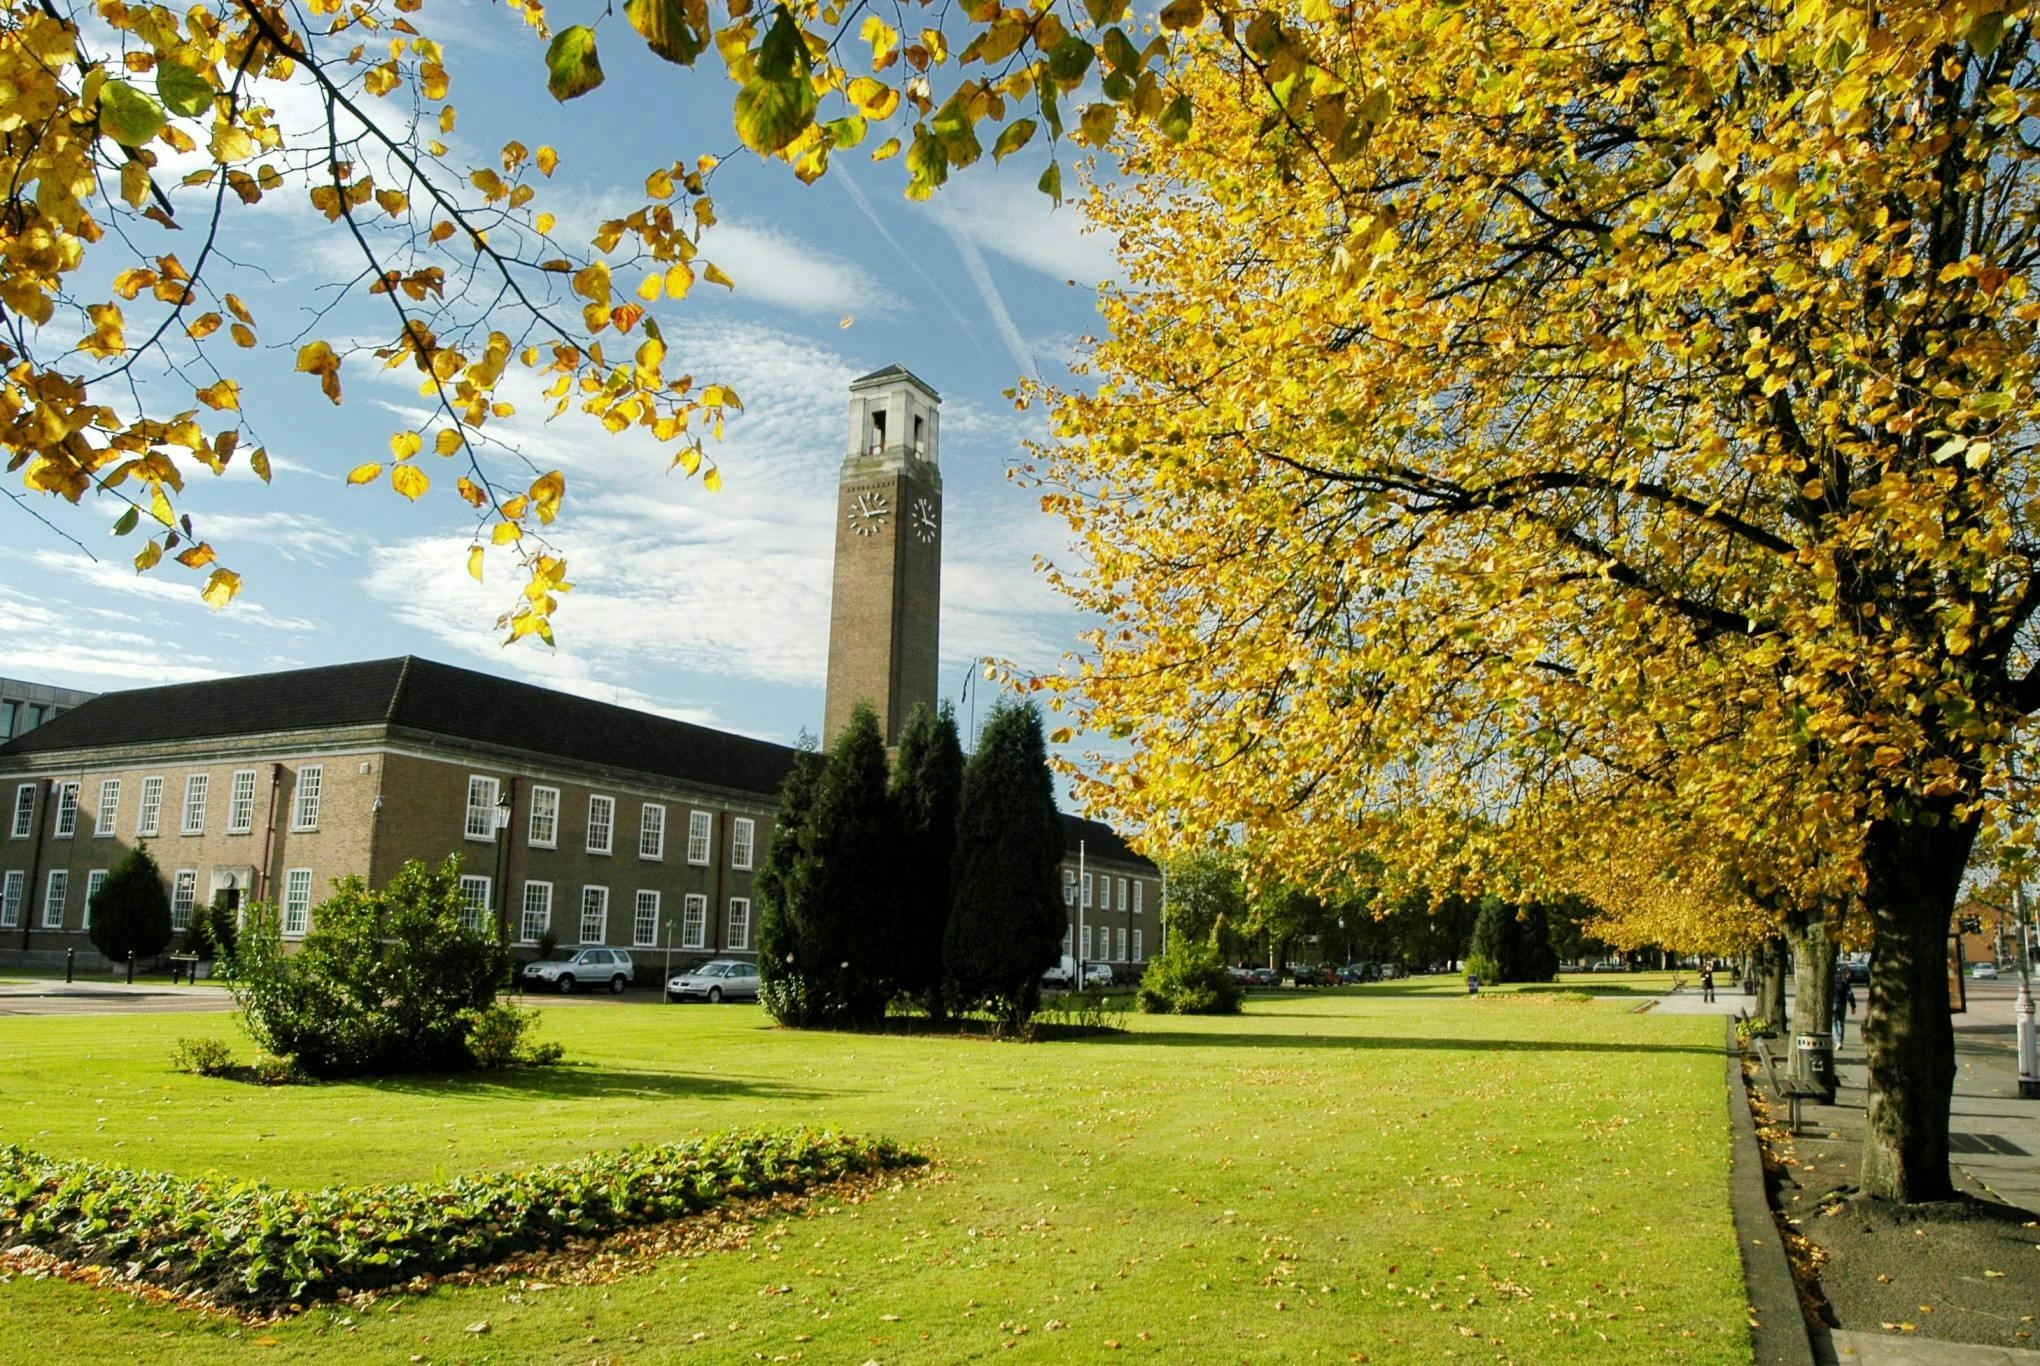 Image of the Civic Center of Salford with lush green grass in the foreground and yellow trees.